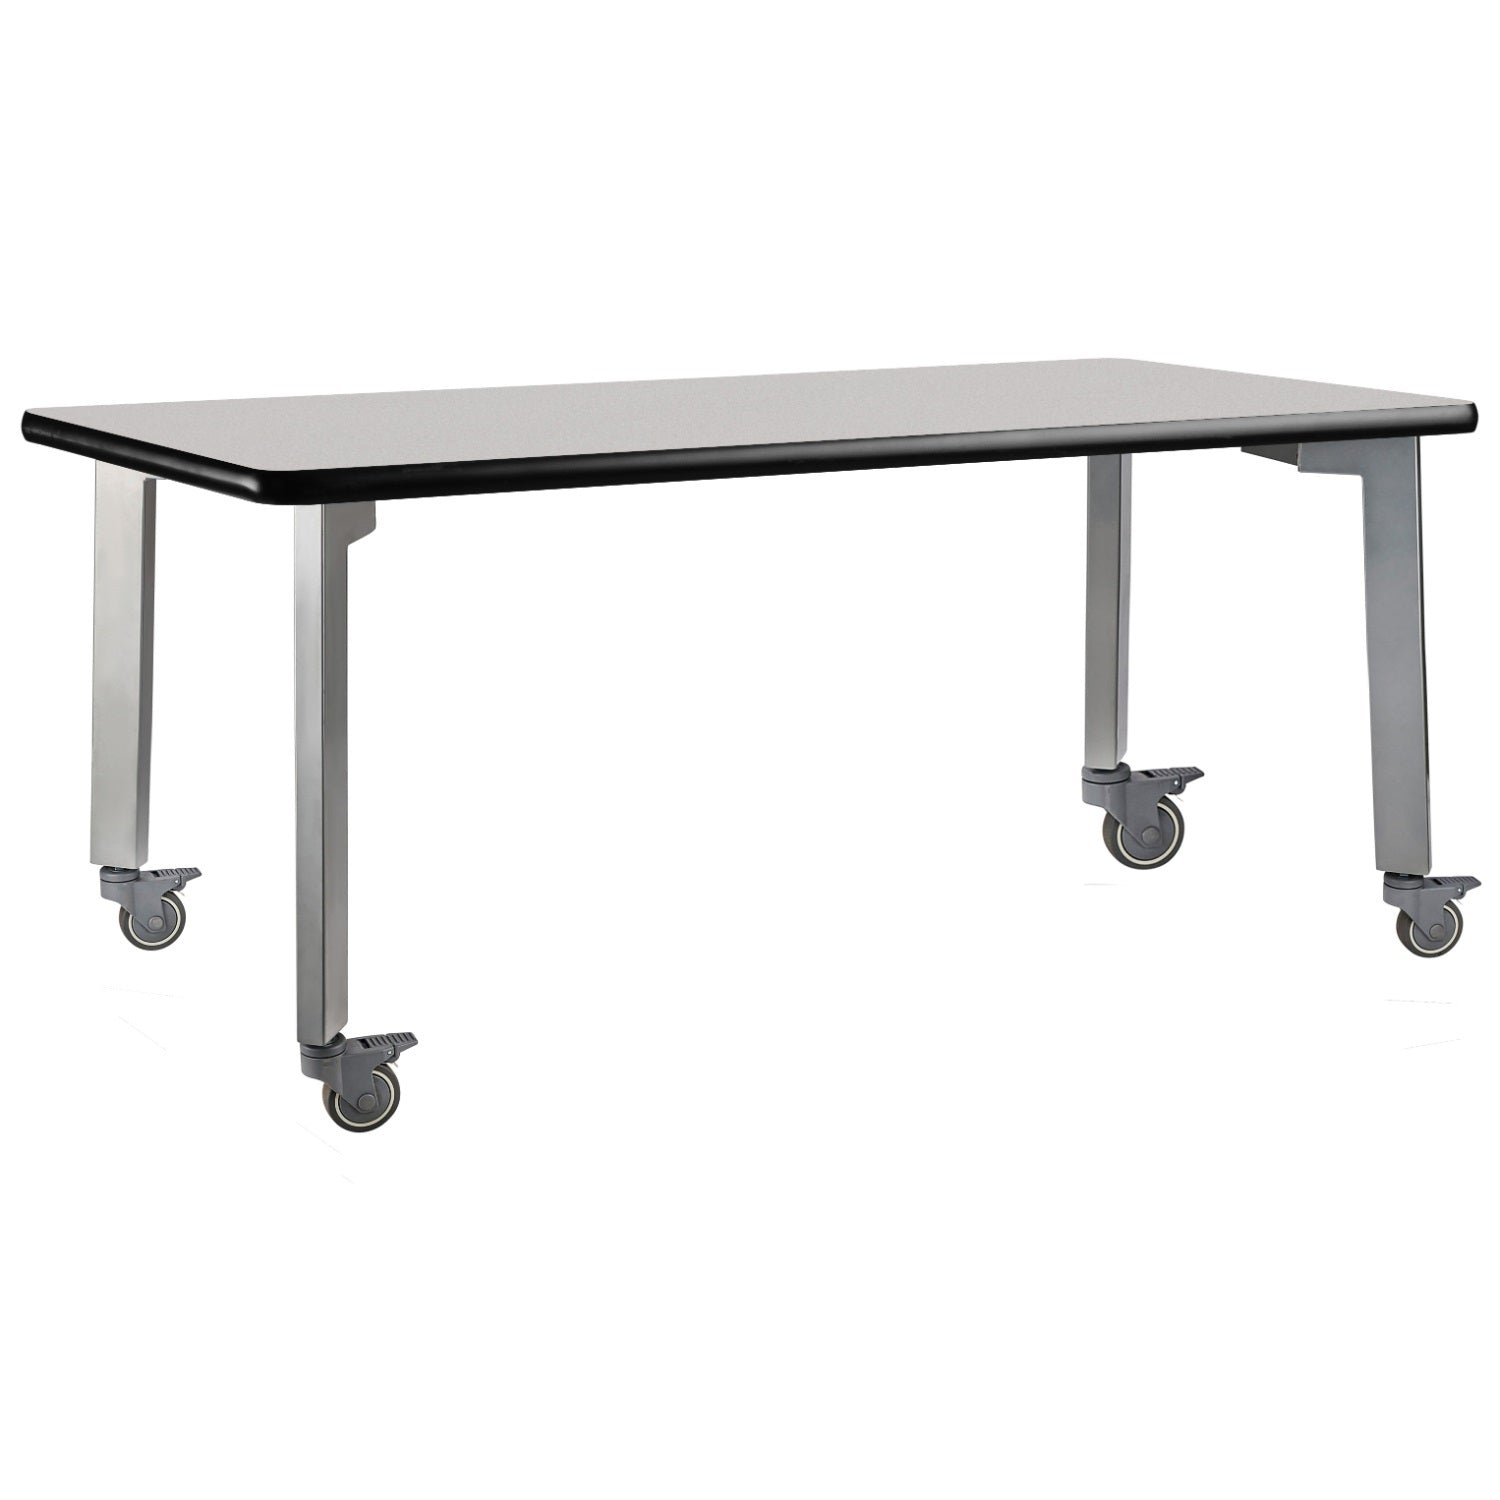 Titan Mobile Table, 30" x 96", Standard High Pressure Laminate Top with Particleboard Core and T-Mold Edge